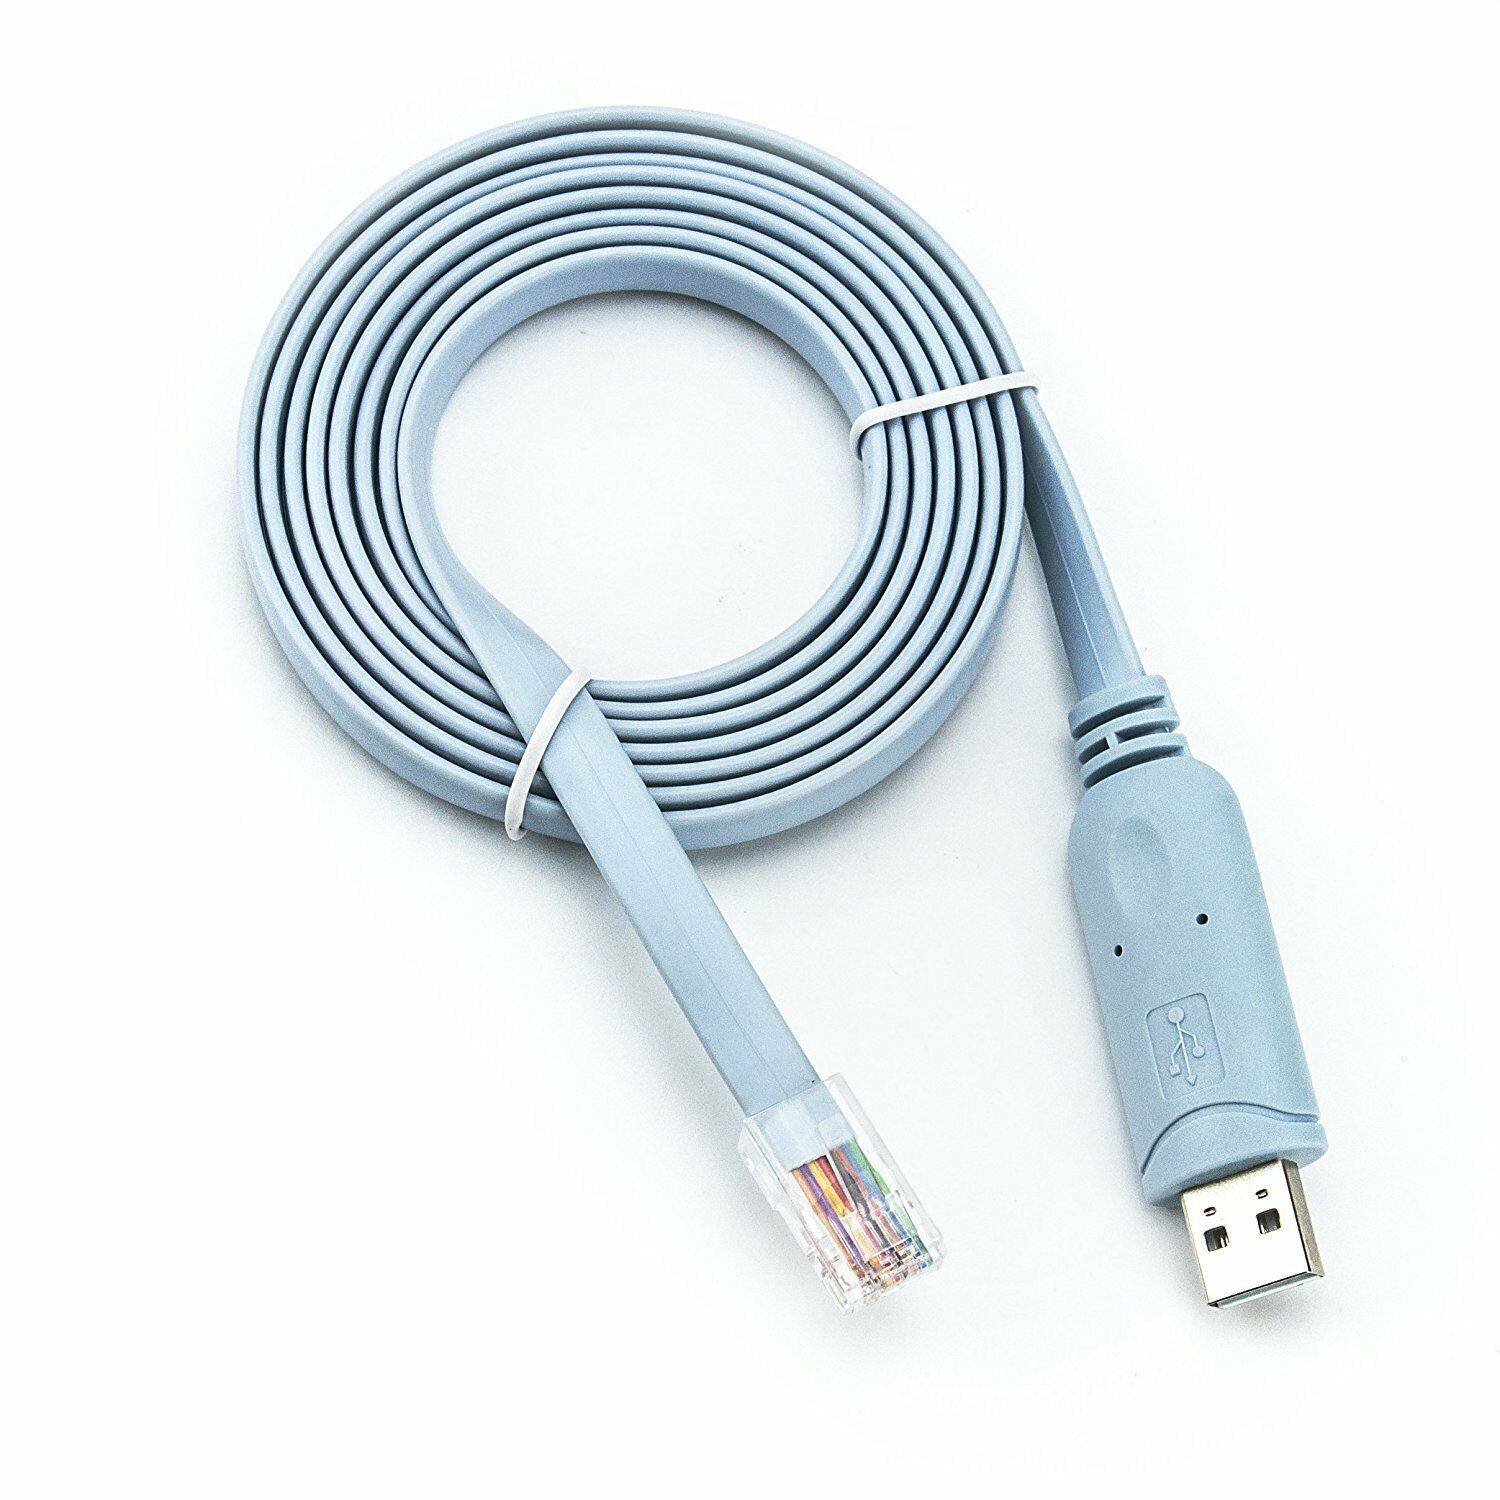 USB to RS232 Serial to RJ45 CAT5 Console Adapter Cable for Cisco Routers FTDI